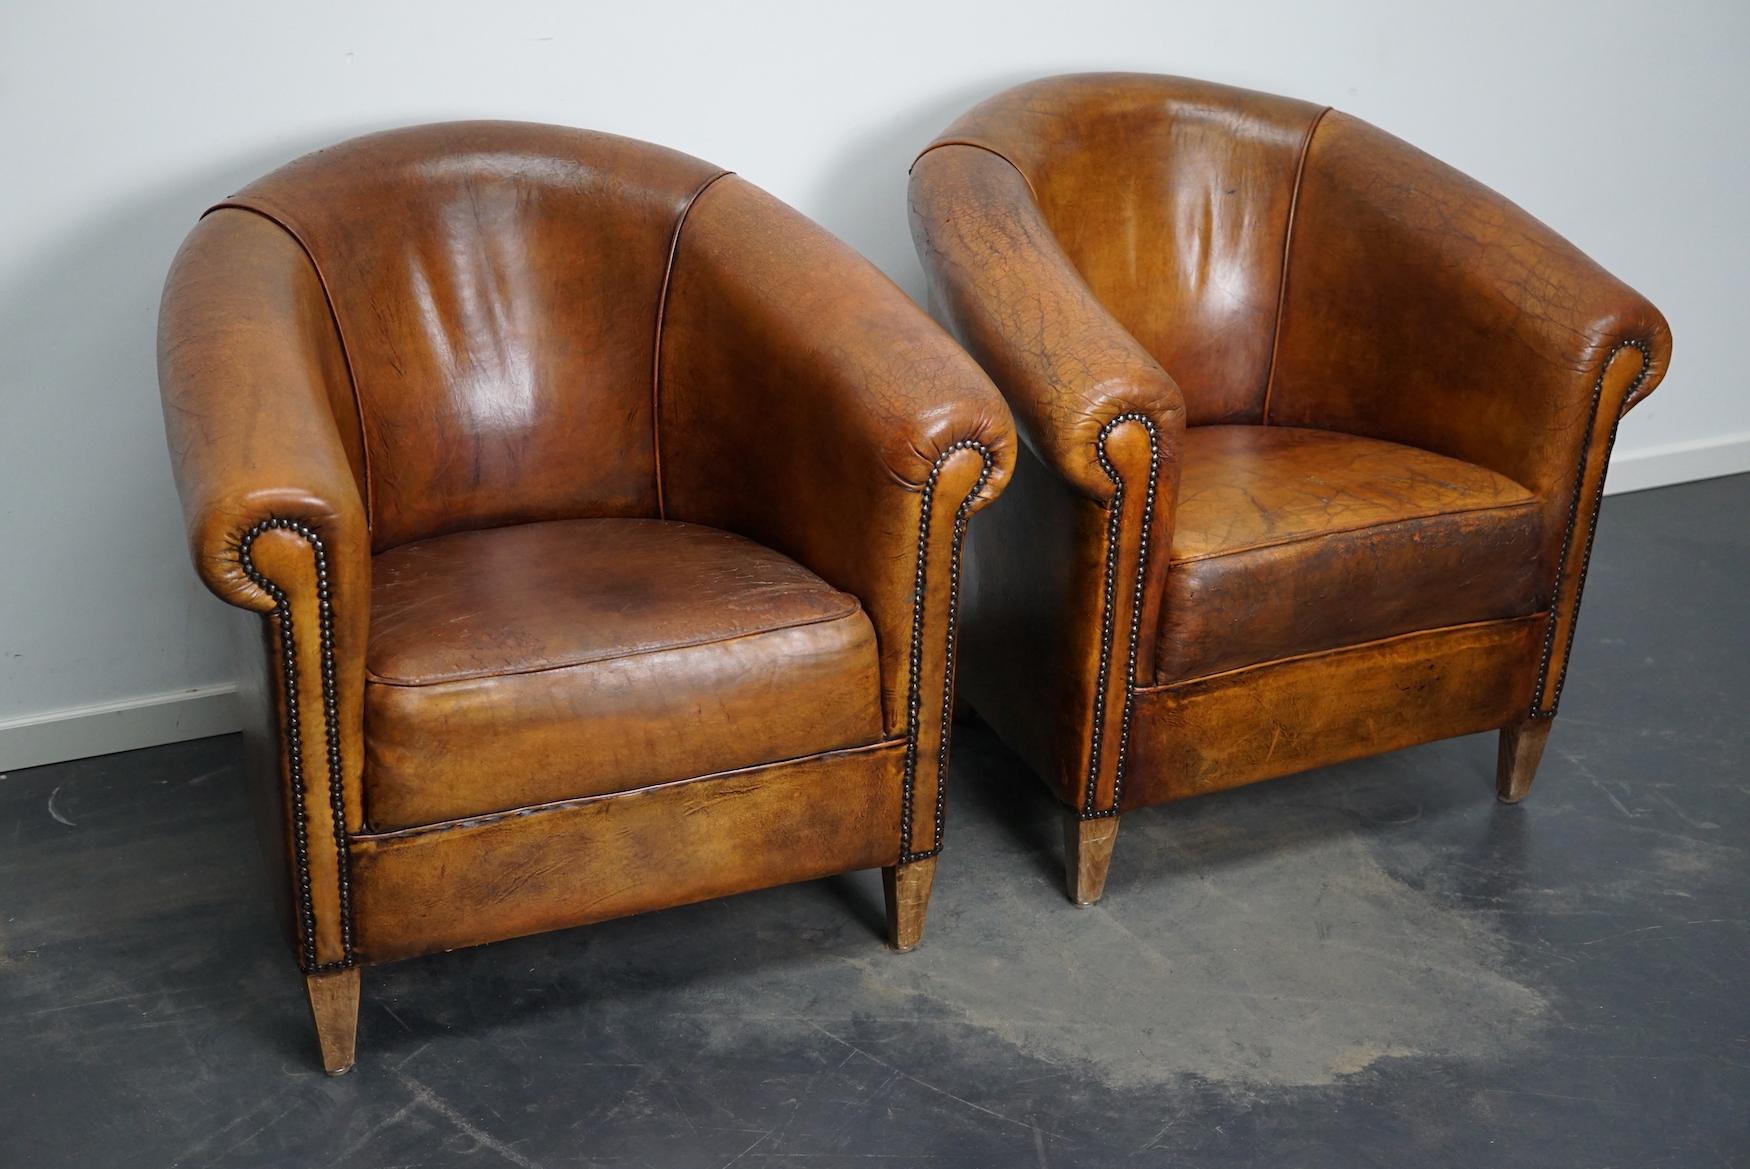 This pair of cognac-colored leather club chairs come from the Netherlands. They are upholstered with cognac-colored leather and feature metal rivets and wooden legs. The chairs show some damage / cracking of the top layer.